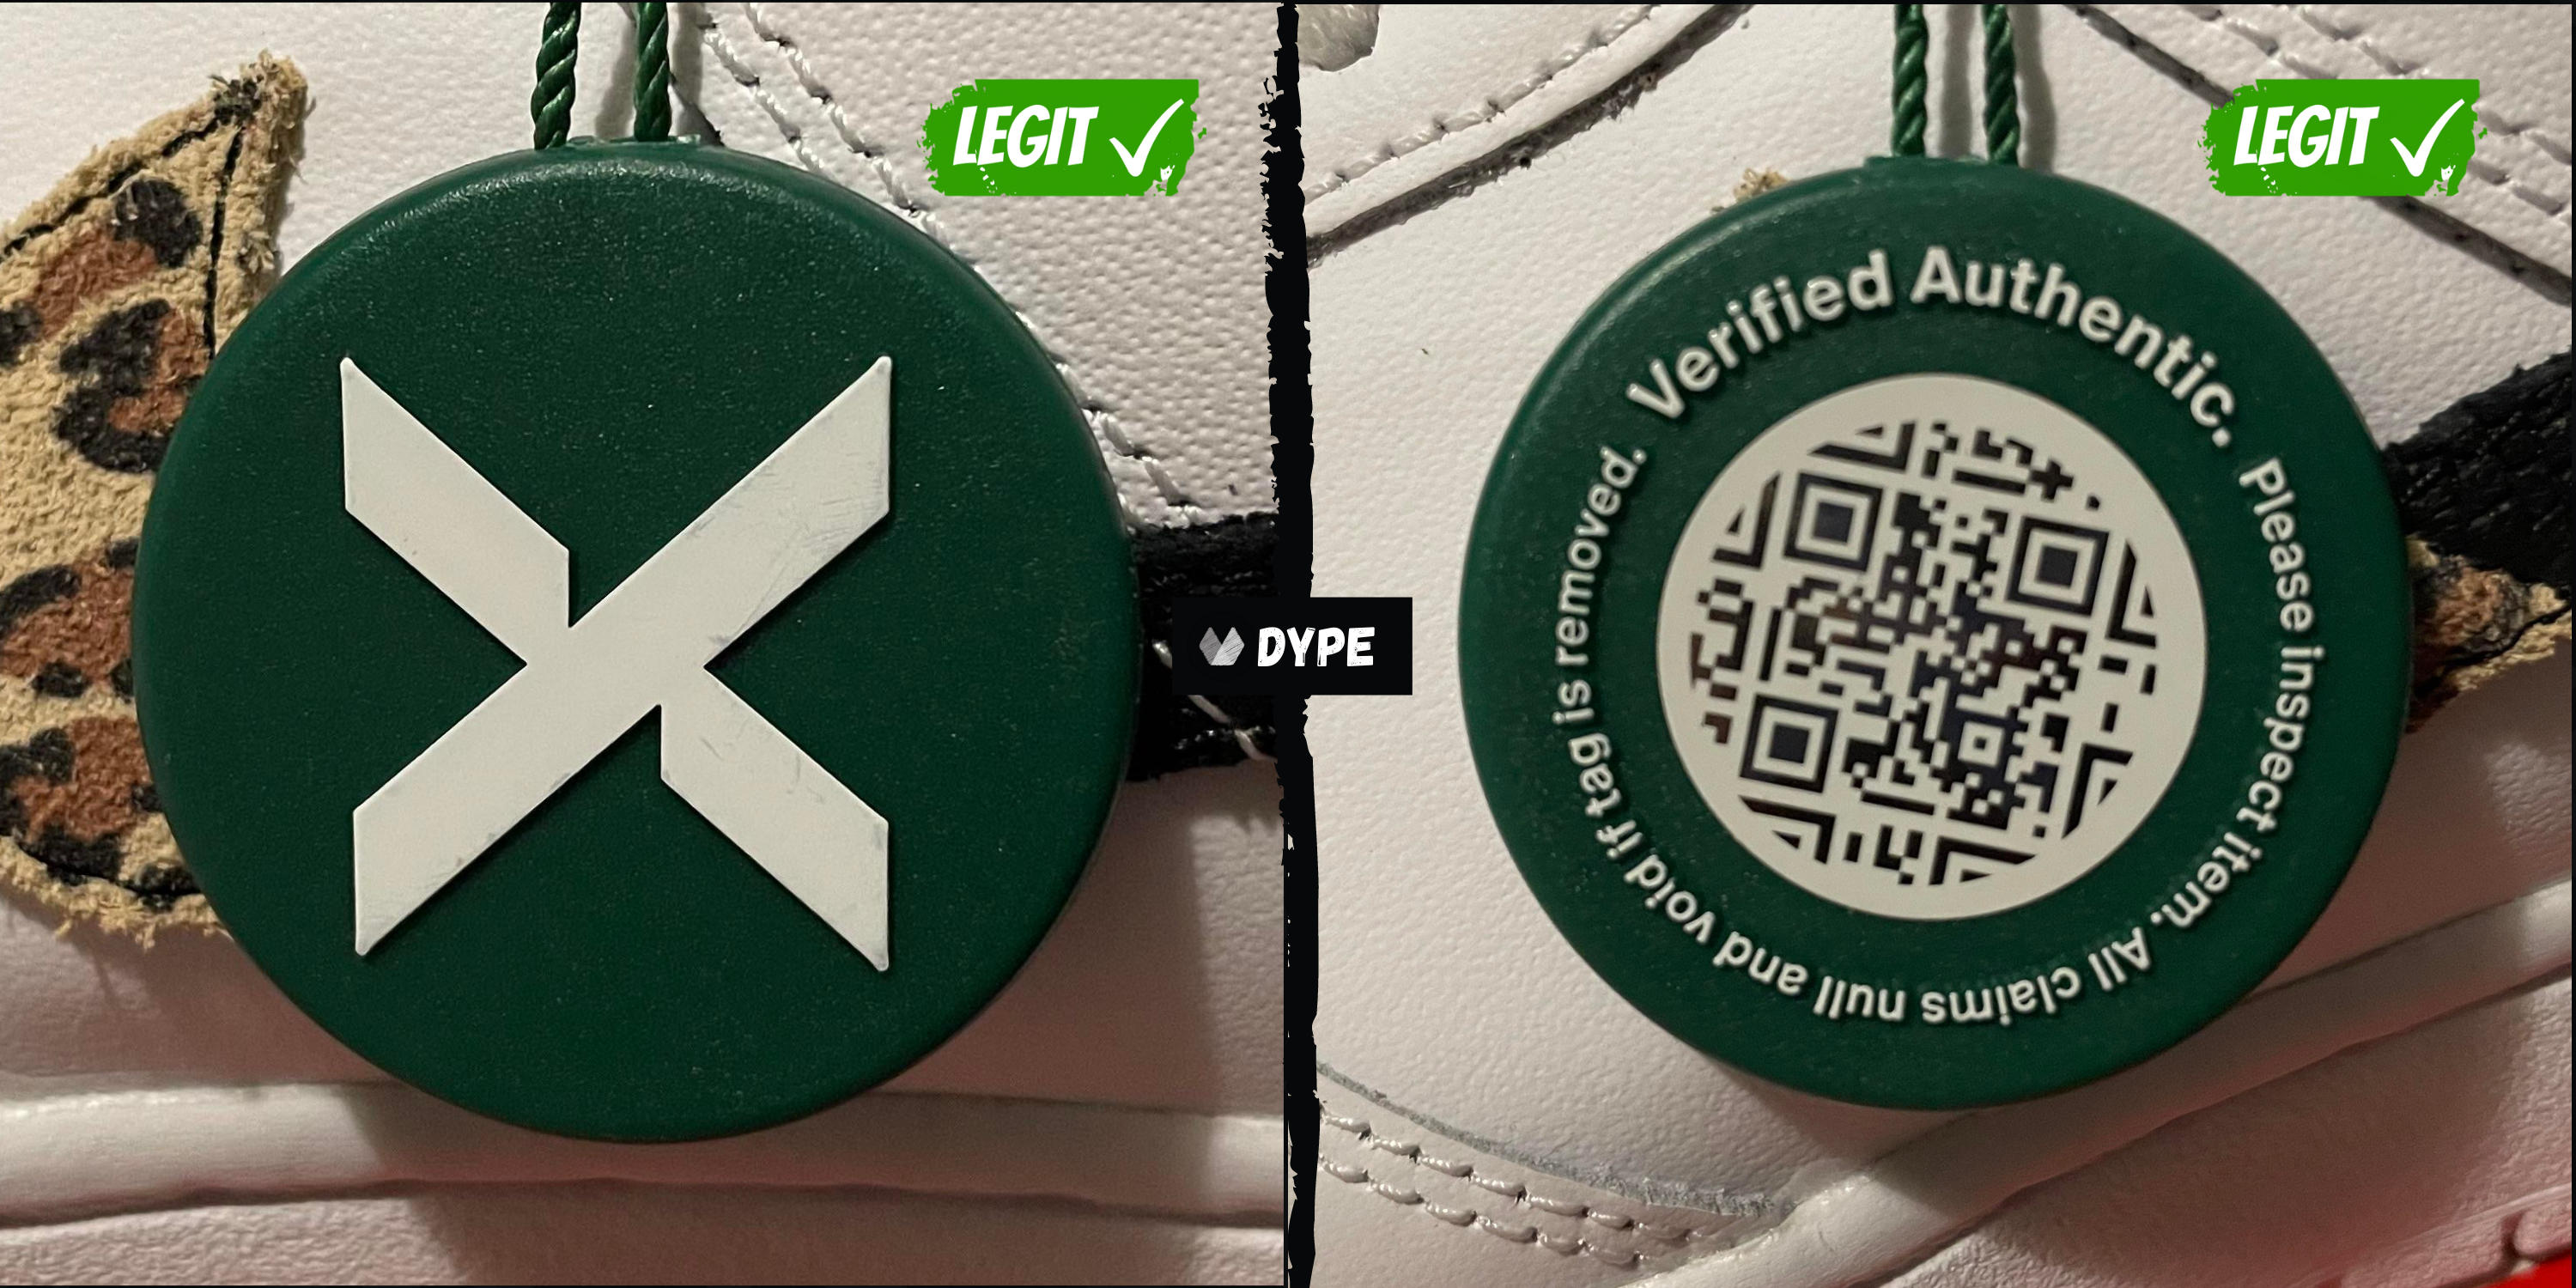 StockX Verified Coin Fake Vs Real Guide